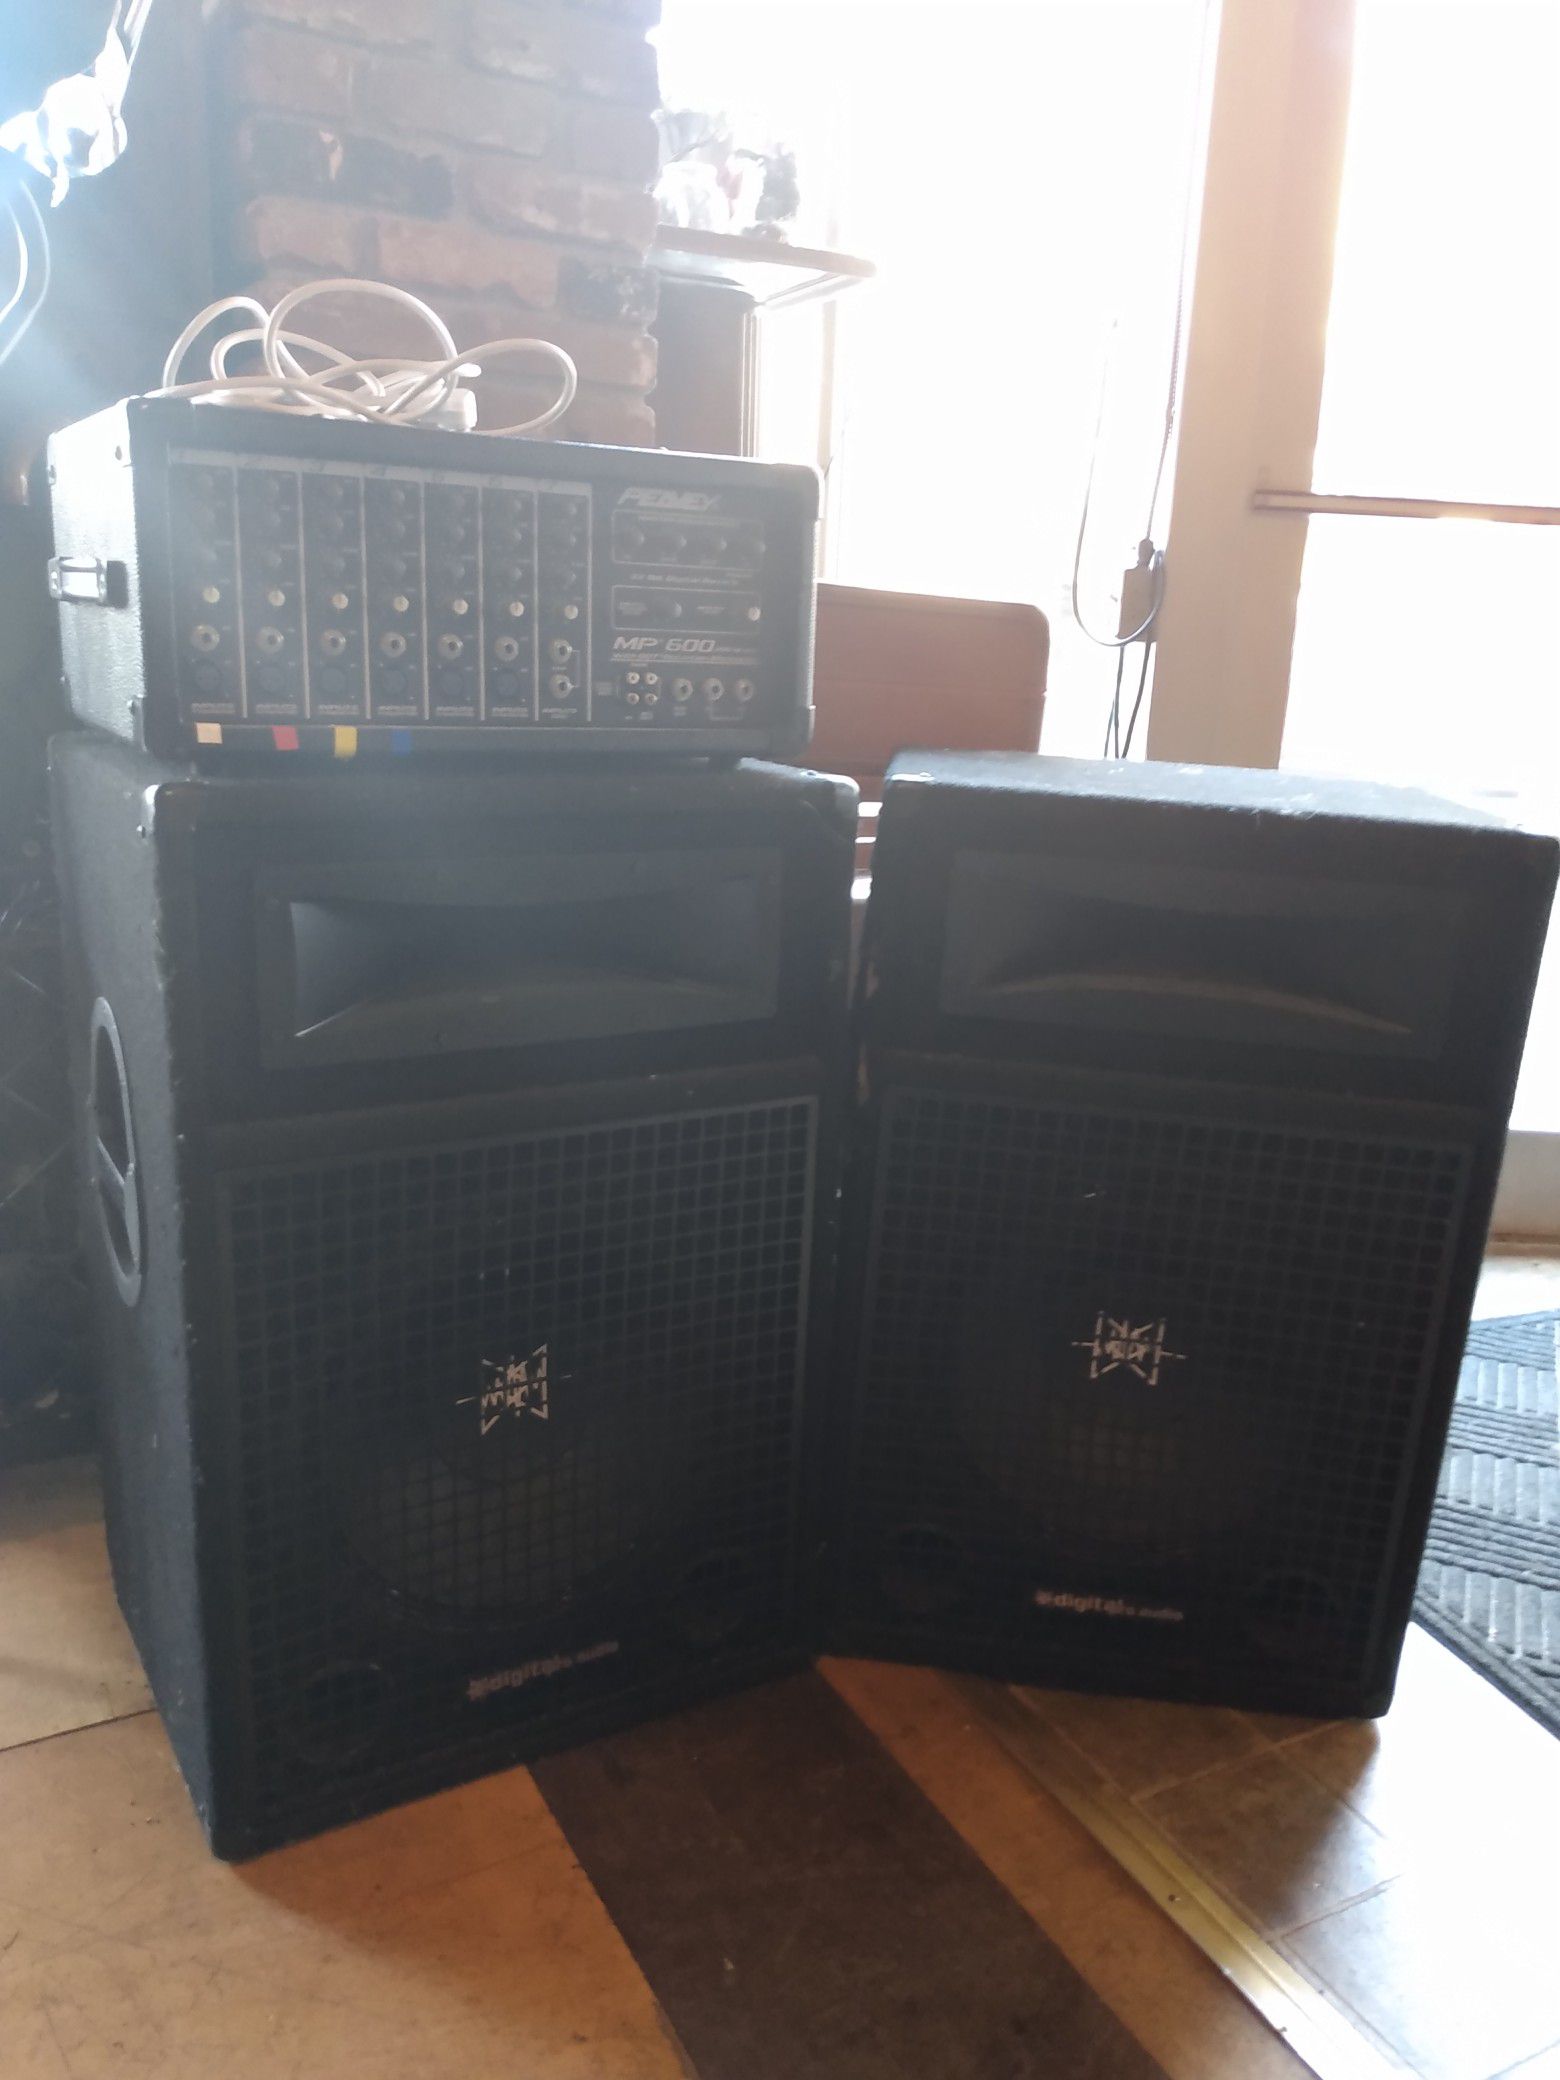 Peavy mp 600 amp/2 speakers with stands